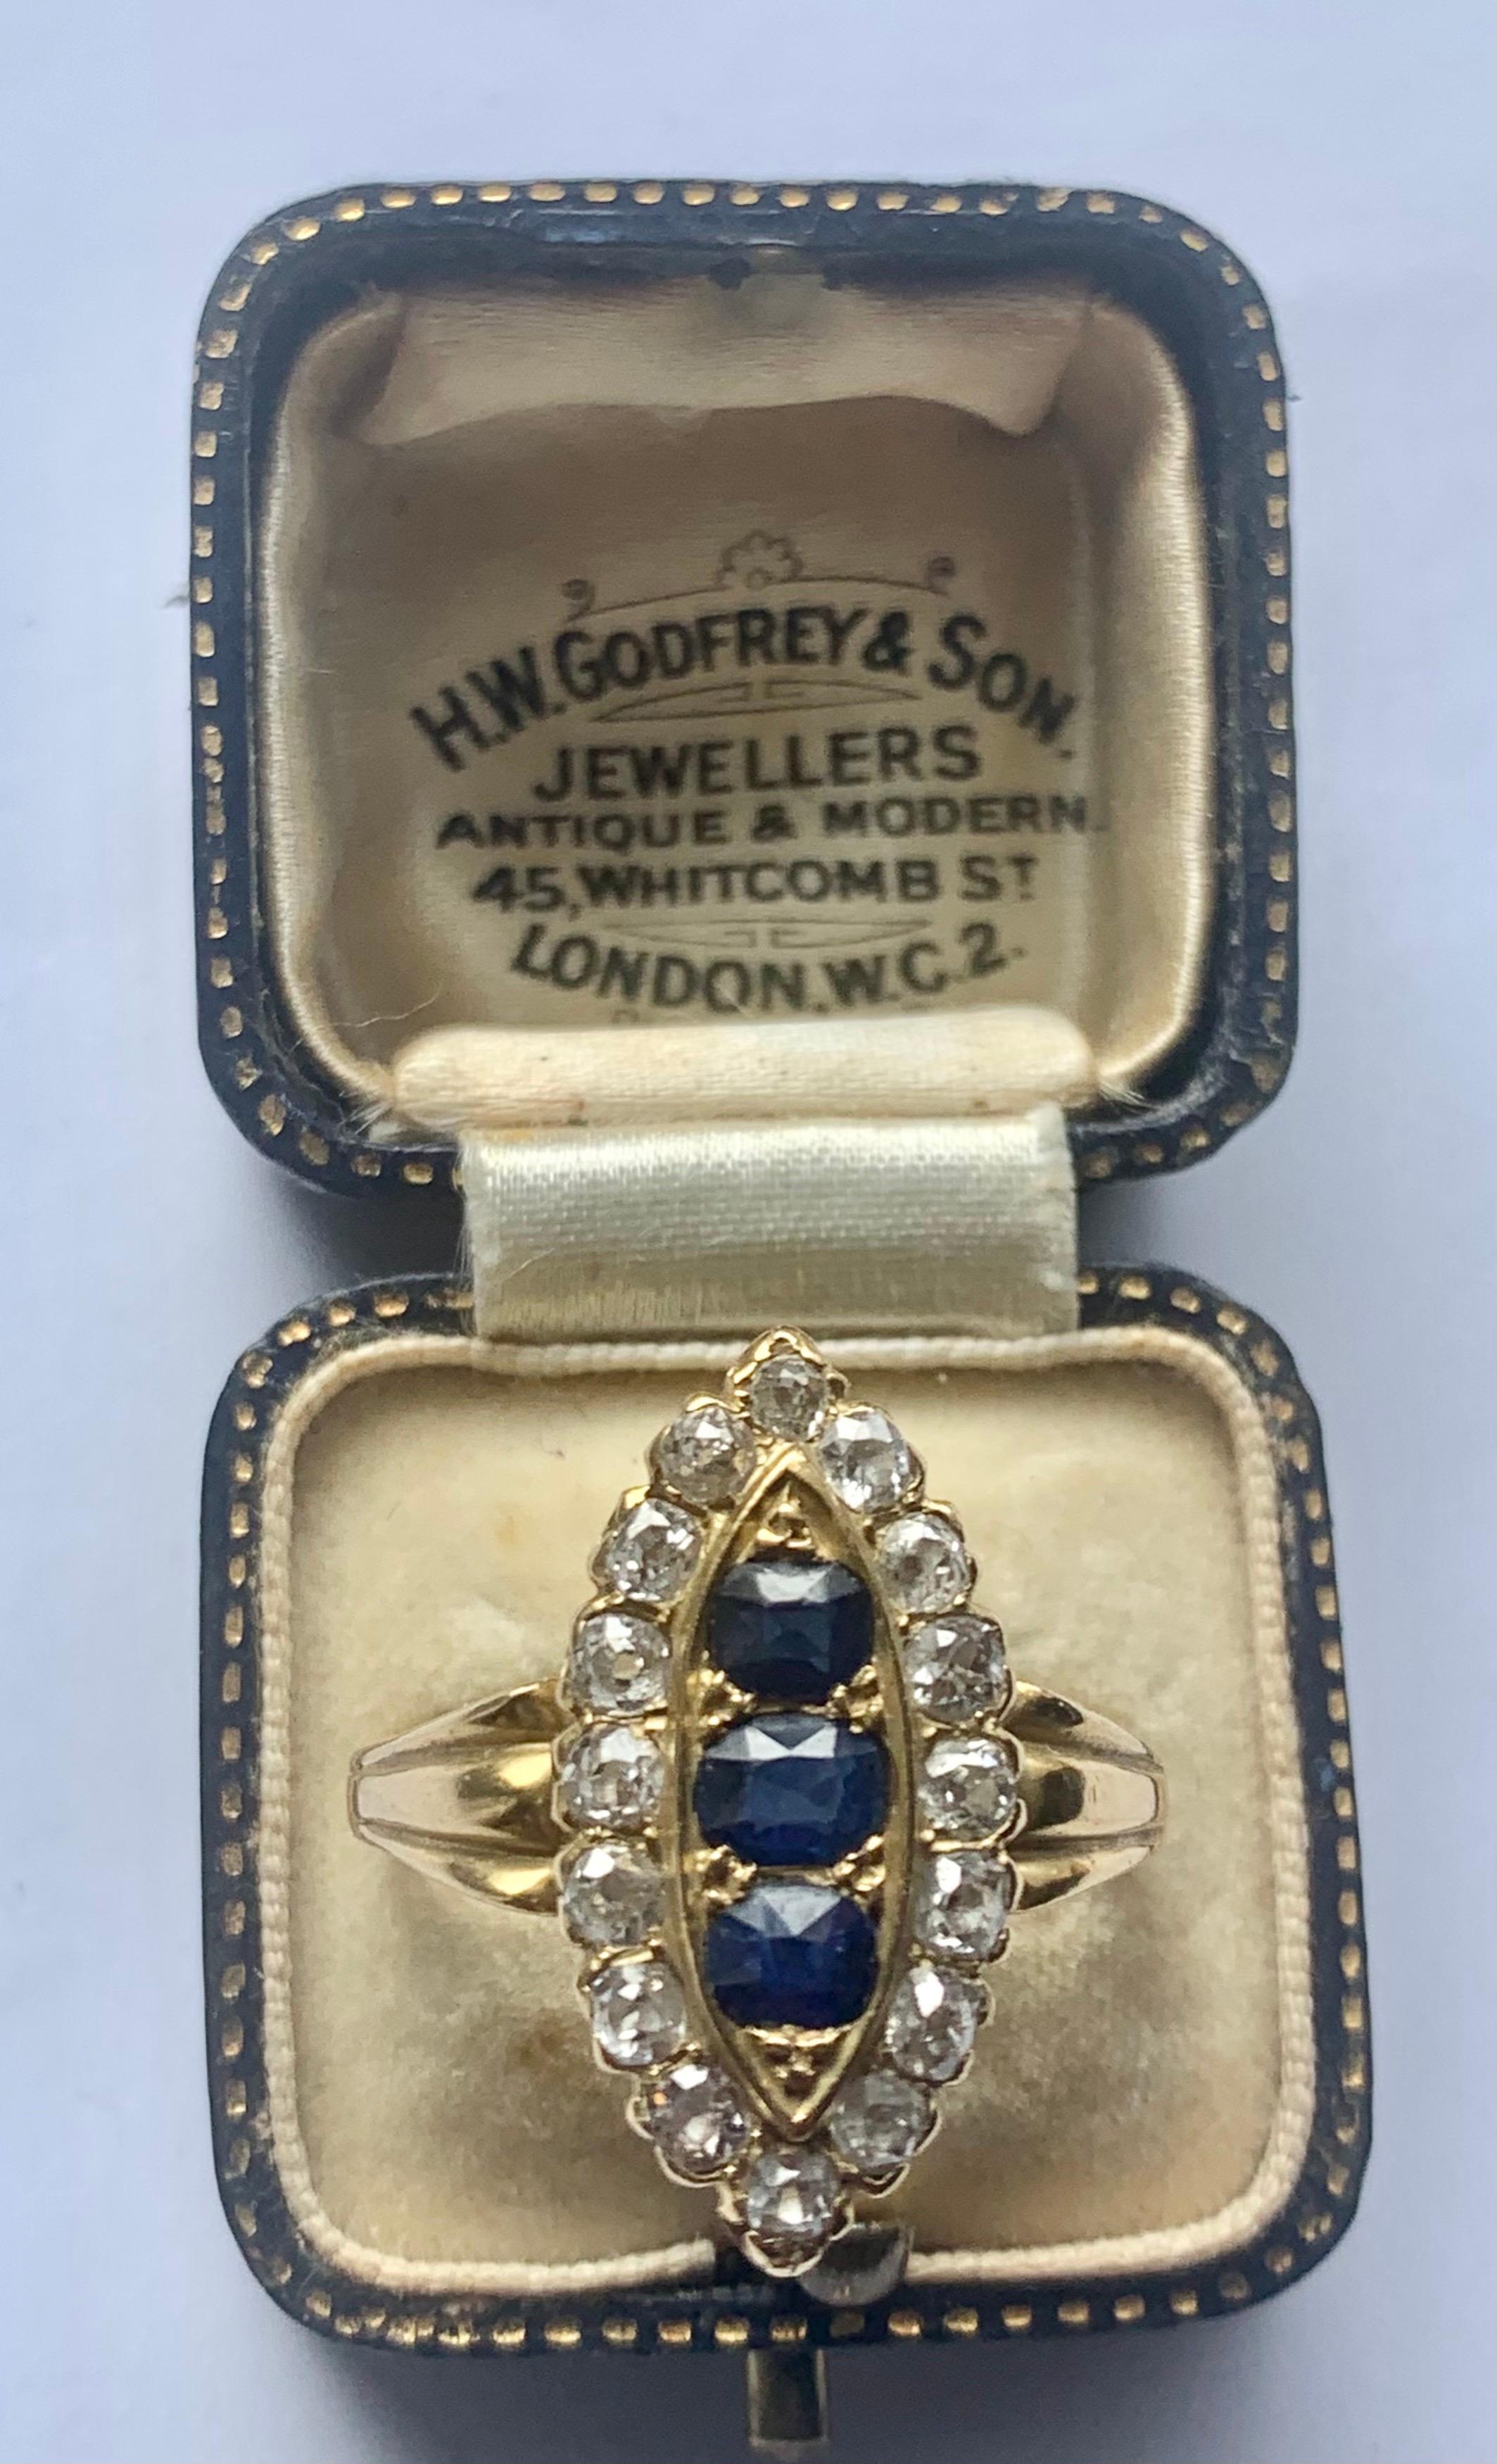 A Stunning high quality Navette Boat shaped Victorian Ring
3 Bright blue sapphires glitter with Rose Cut diamonds in this Victorian Navette style ring (meaning “Little Boat” in French.) Three antique sapphires are set in delicate square-shaped